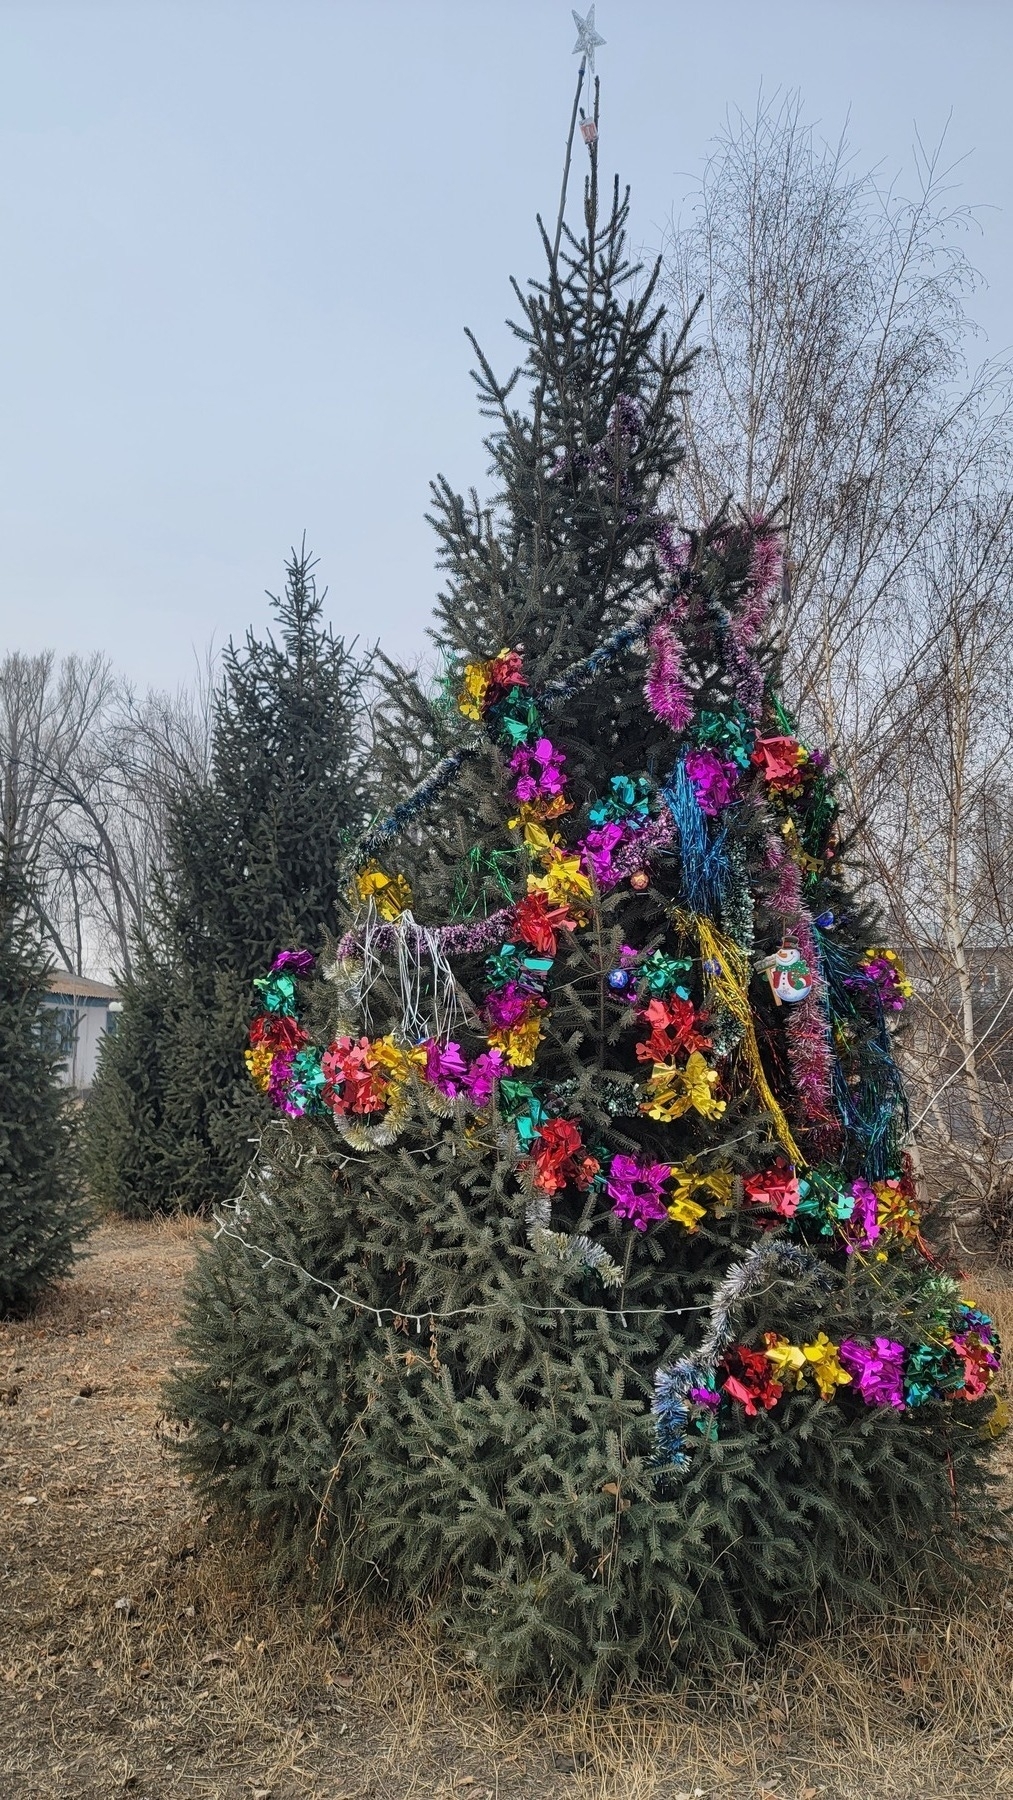 real tree haphazardly decorated with lights and colored garlands, but mainly around the middle of the tree